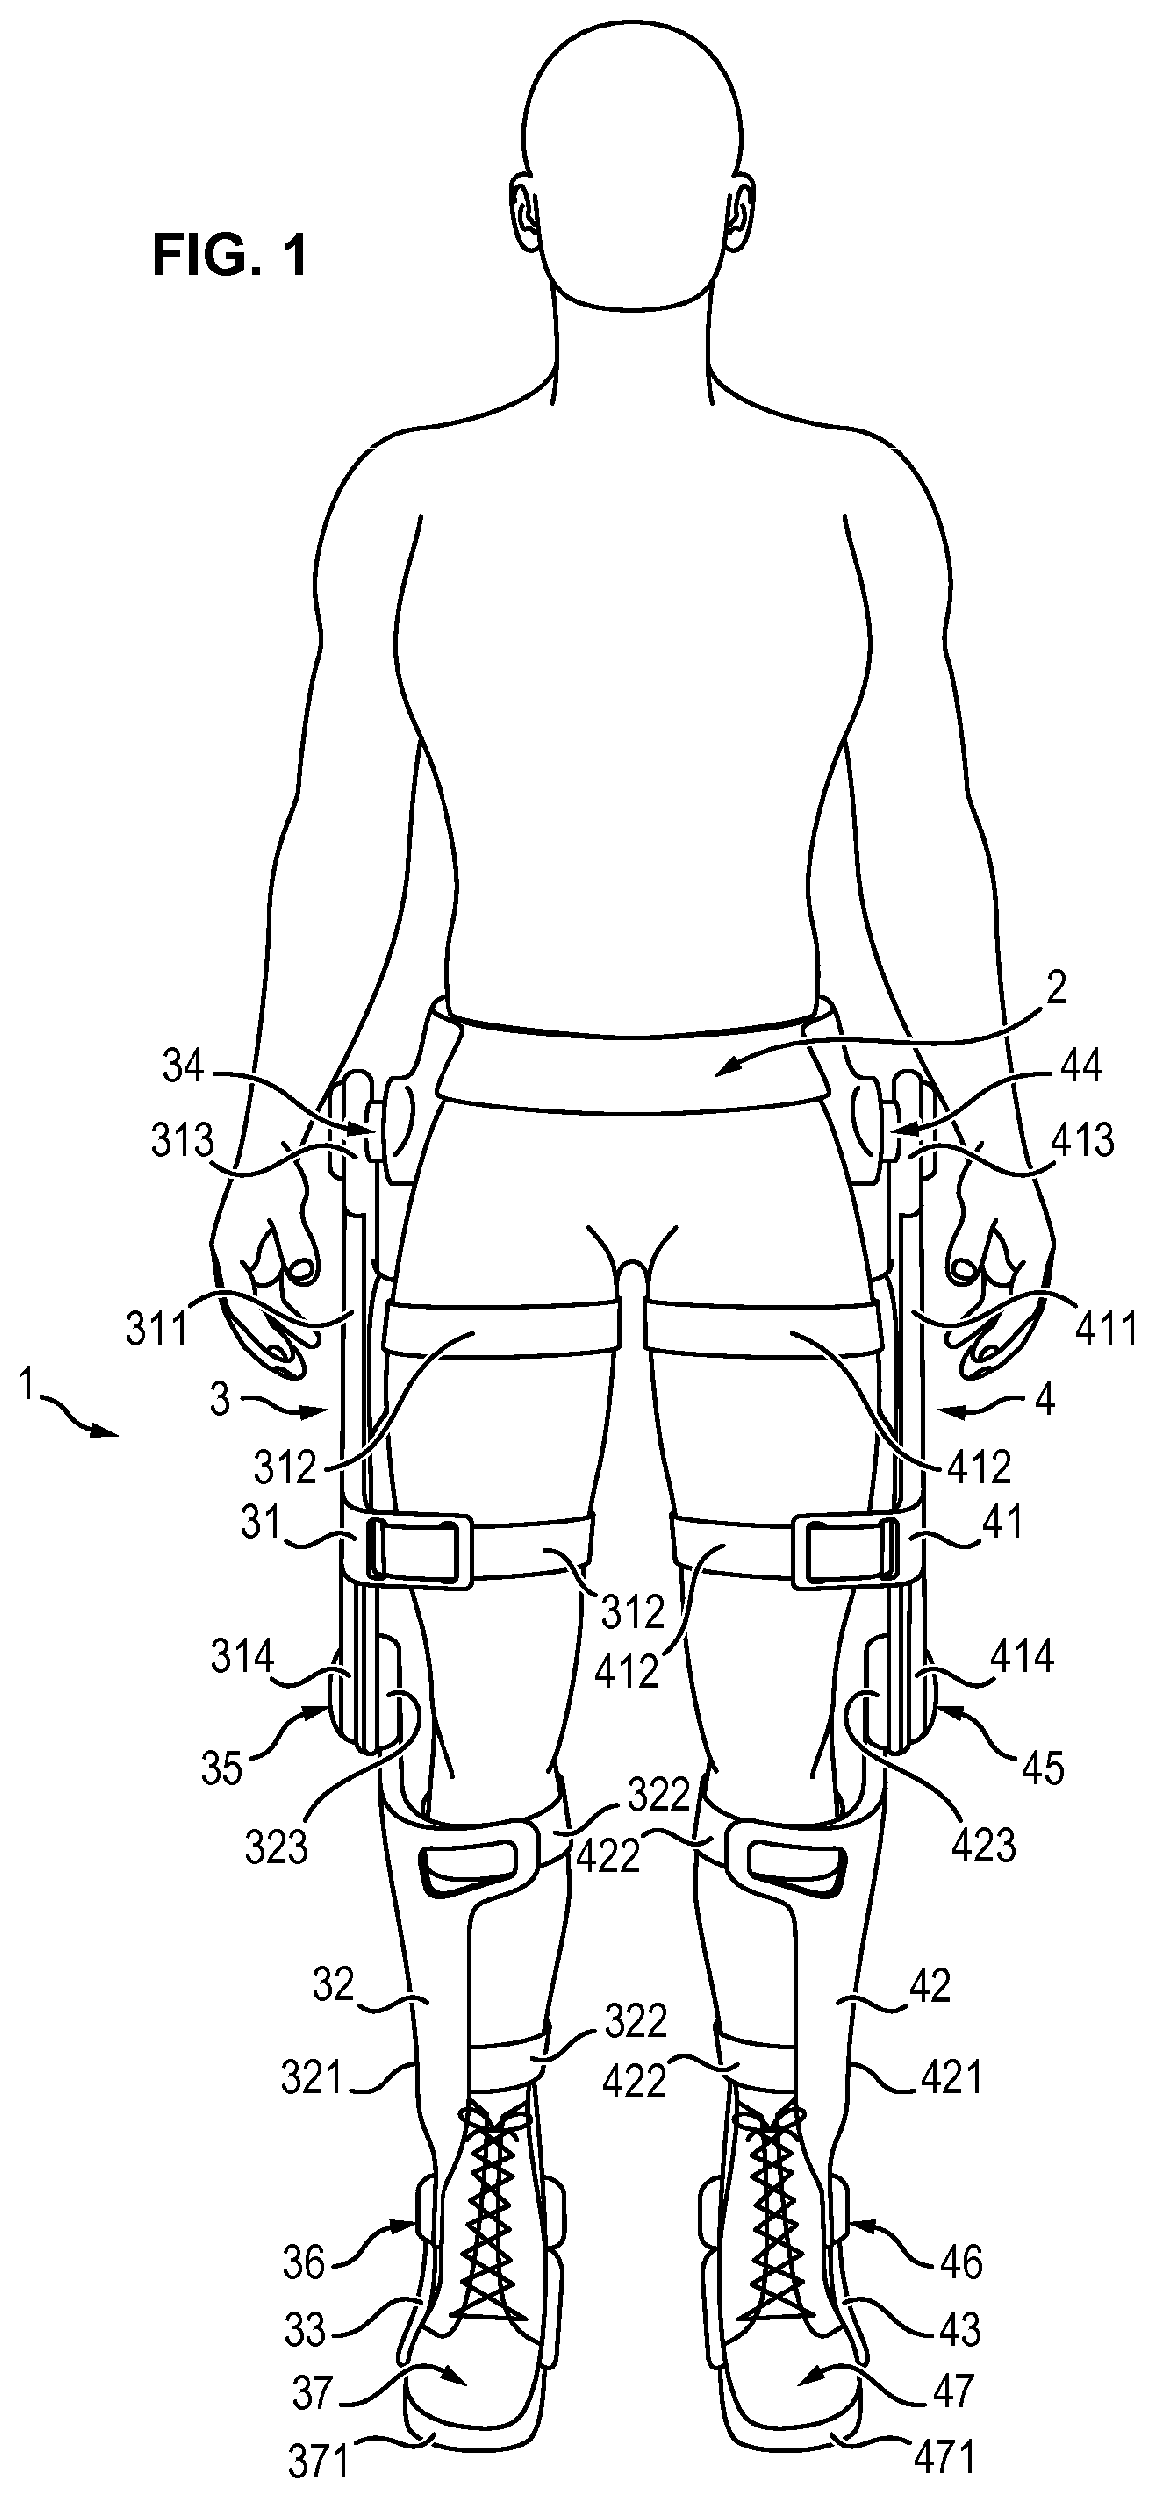 Linking device for an exoskeleton structure facilitating the carrying of loads while walking or running